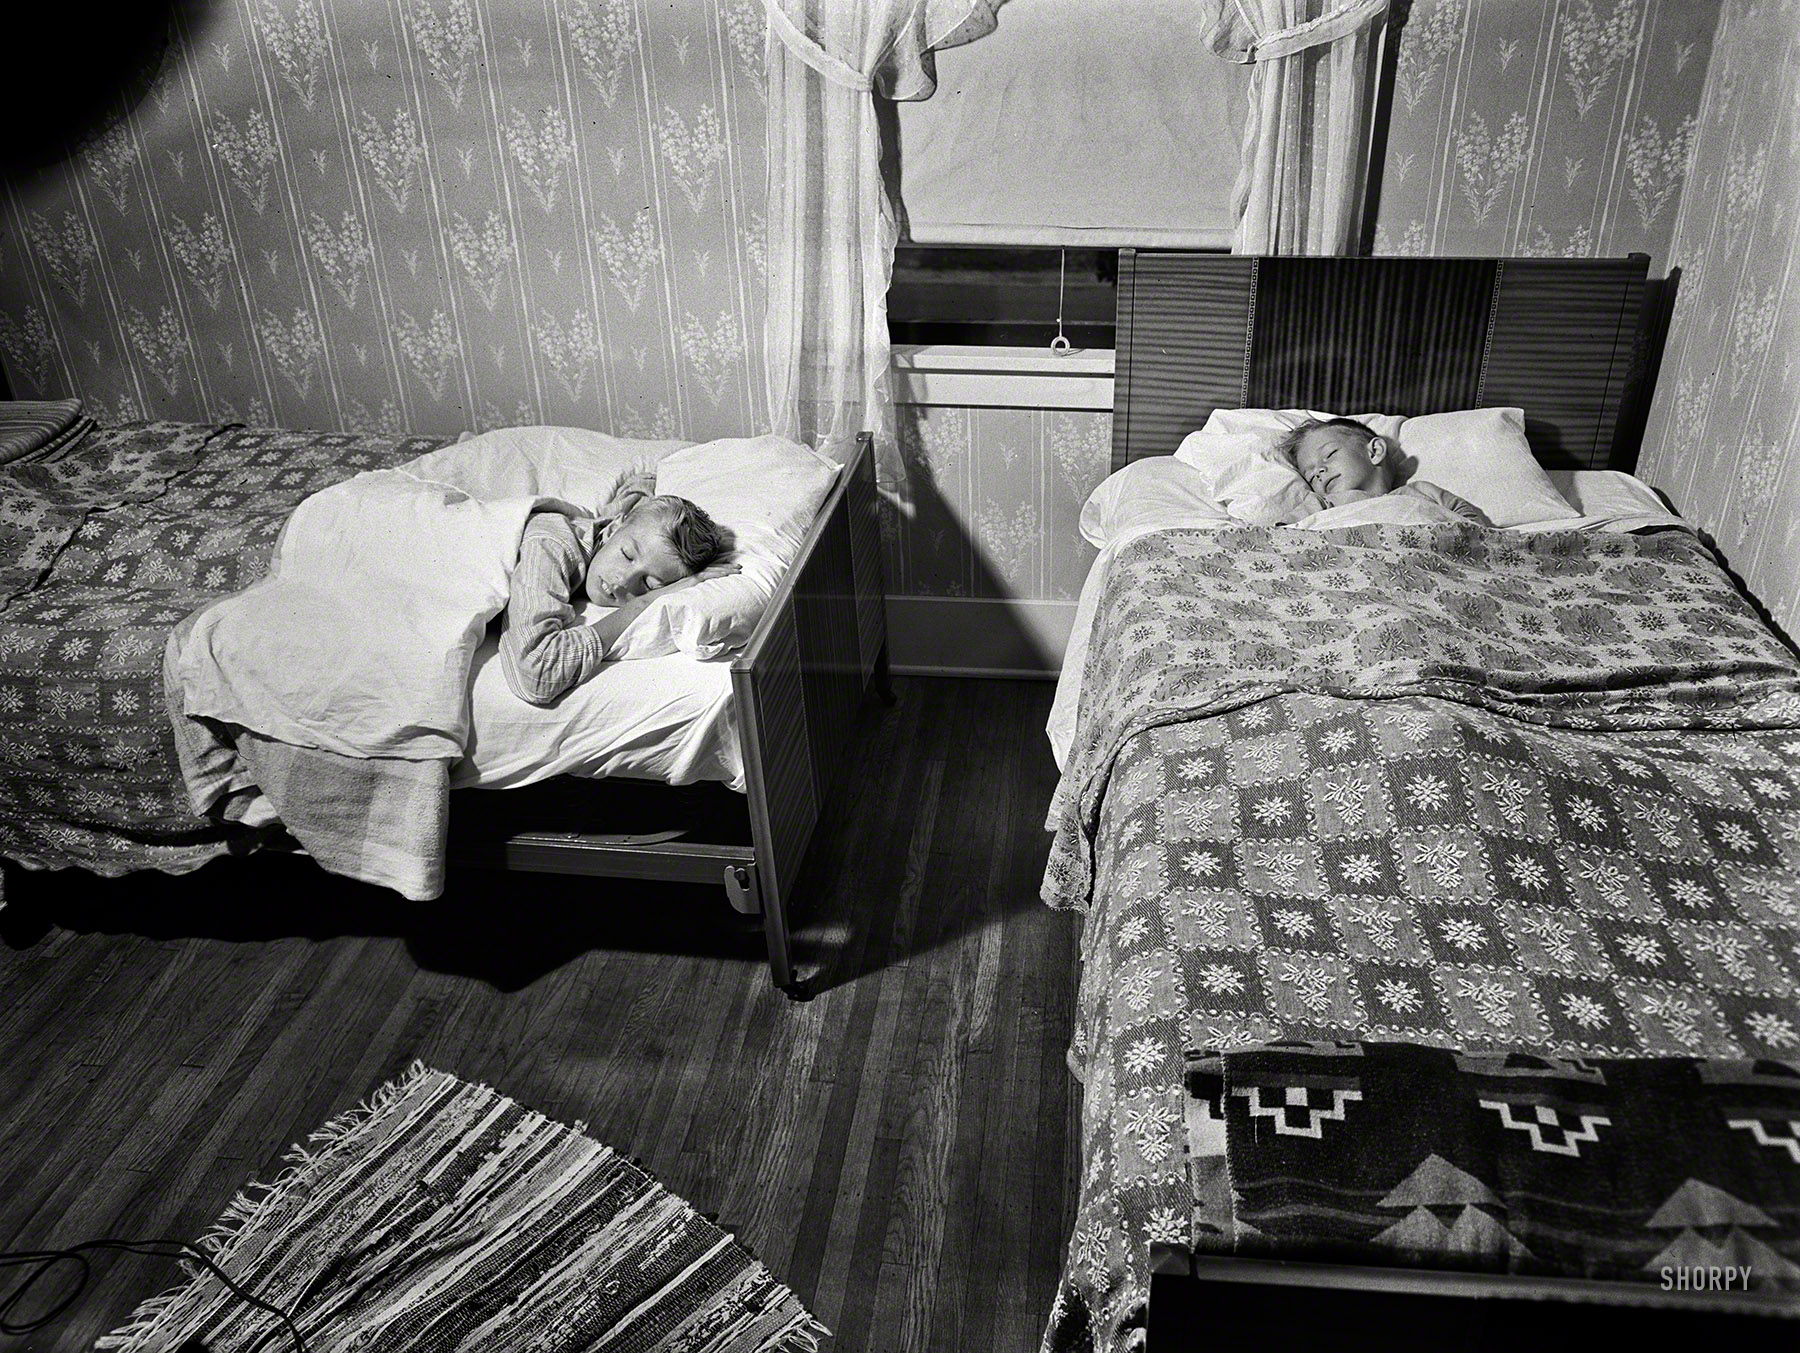 September 1942. "Rochester, New York. The two Babcock boys share one room." Howard and Earl drifting off to Slumberland, with Ralph Amdursky's floodight showing the way. Photo for the Office of War Information. View full size.